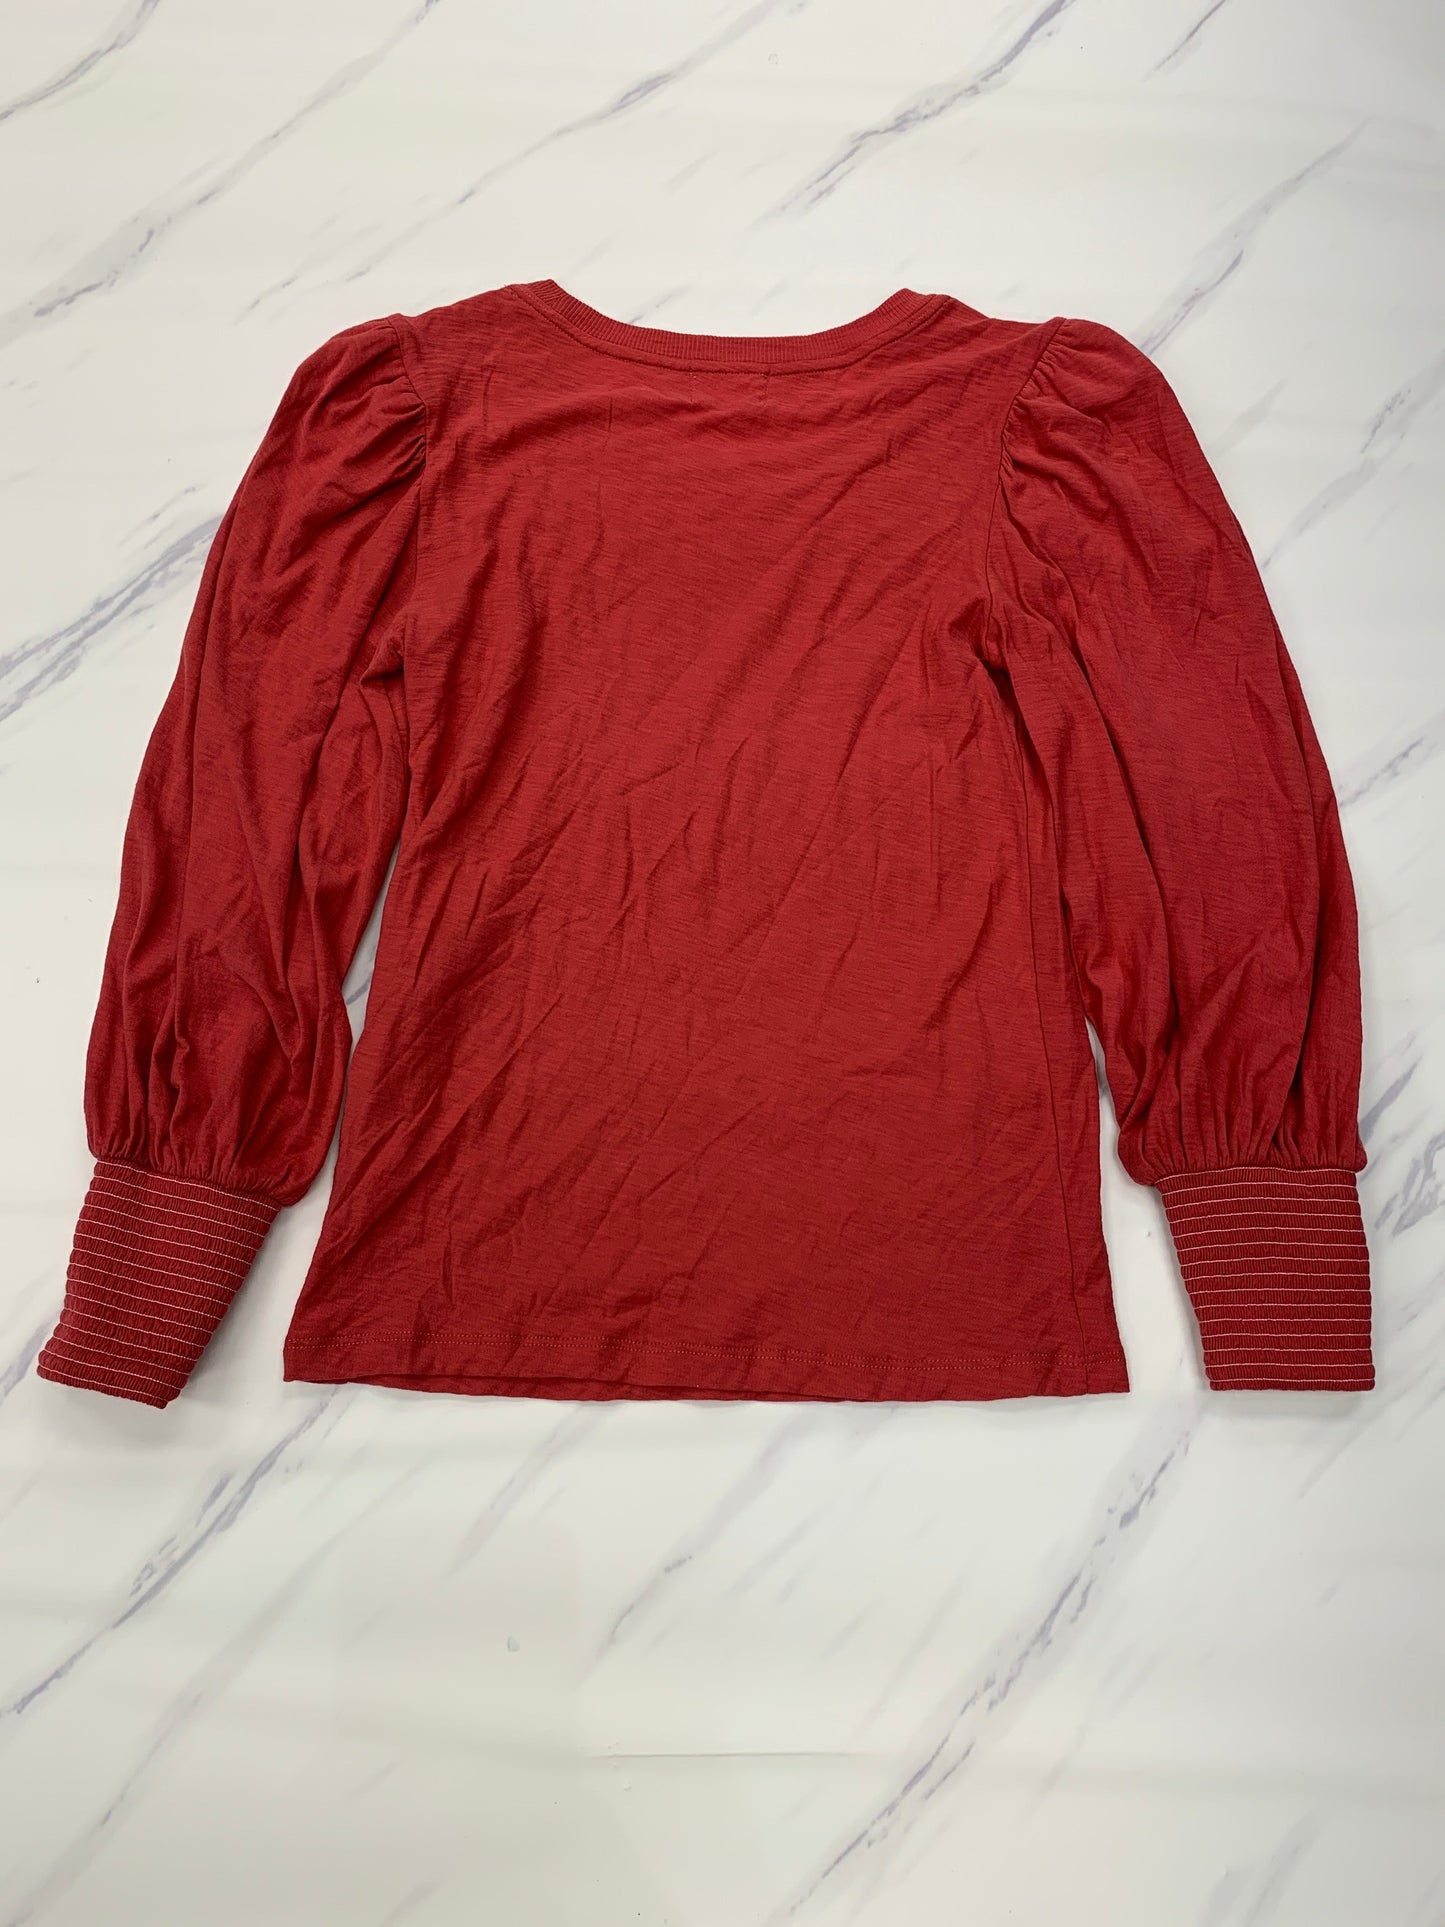 Red Top Long Sleeve Nation, Size Xs